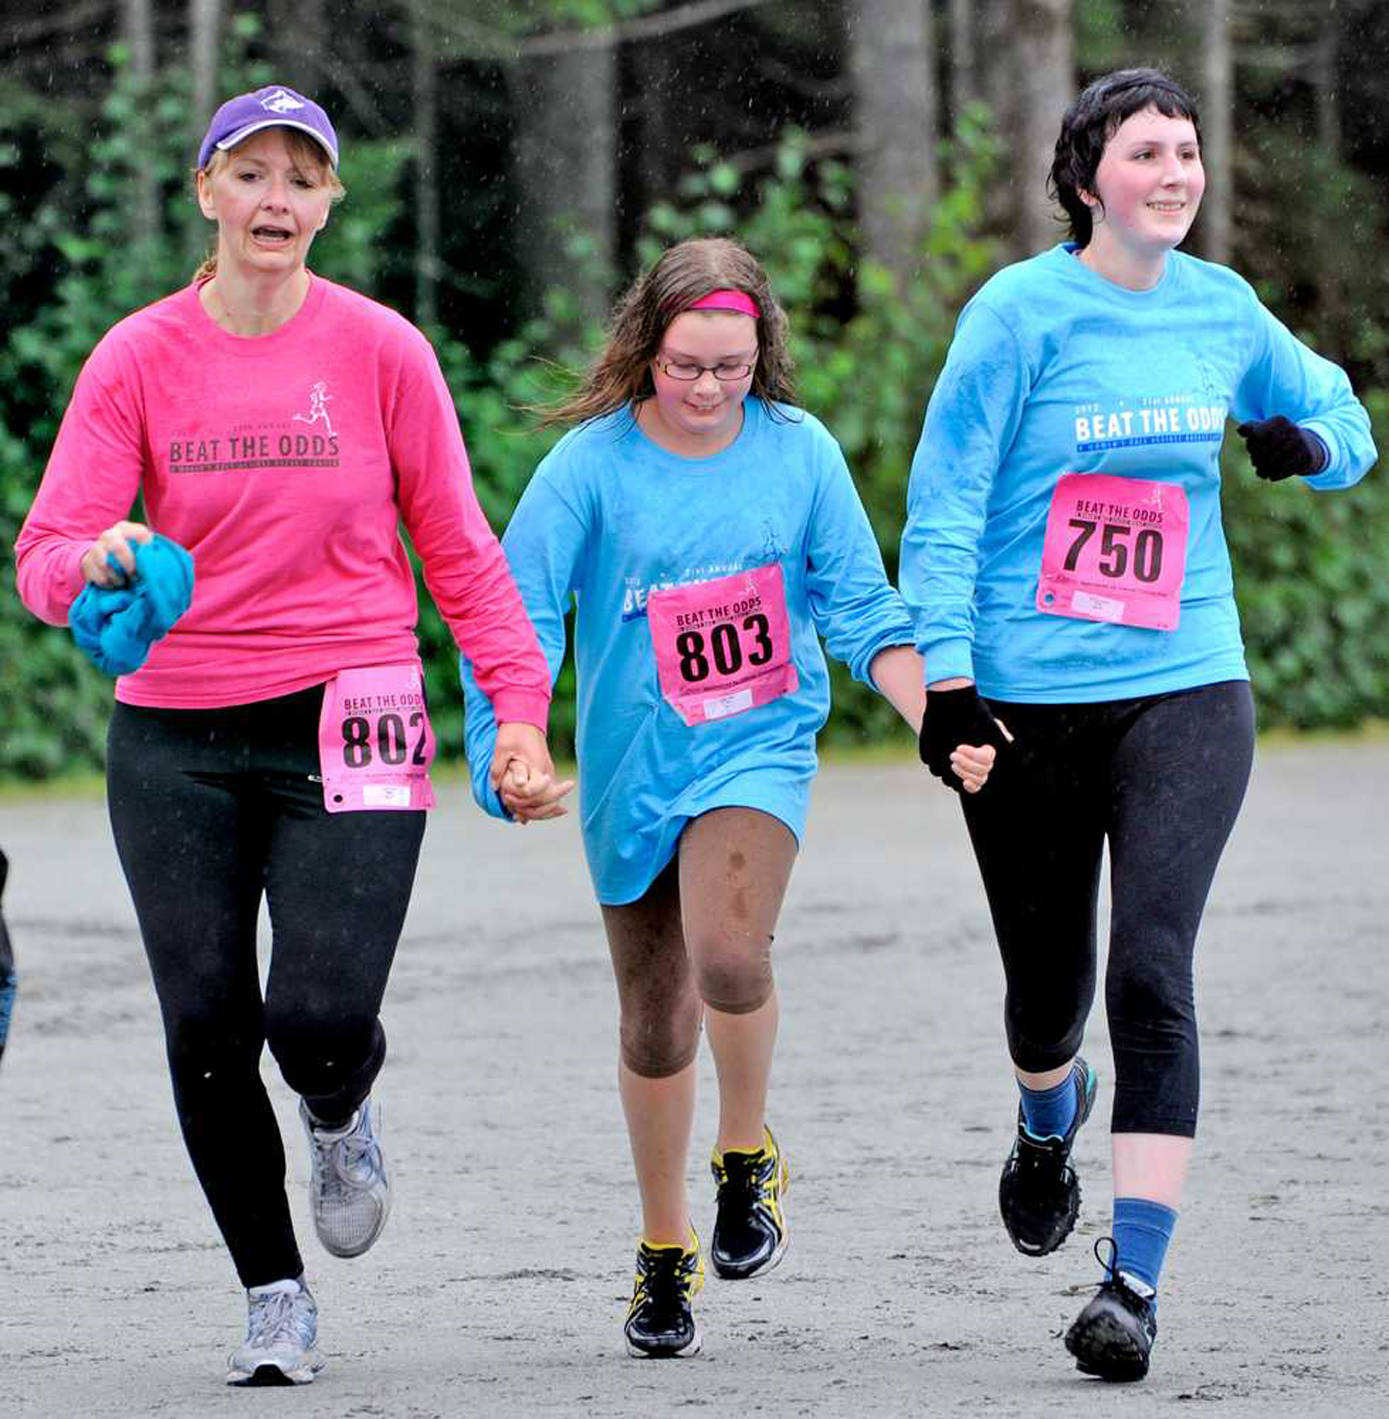 In this August 2012 photo, Cindy Stadt, left, finishes Saturday’s Beat The Odds race with daughters Riley Stadt, center, and Lindsey Daniel, right. (Juneau Empire File)